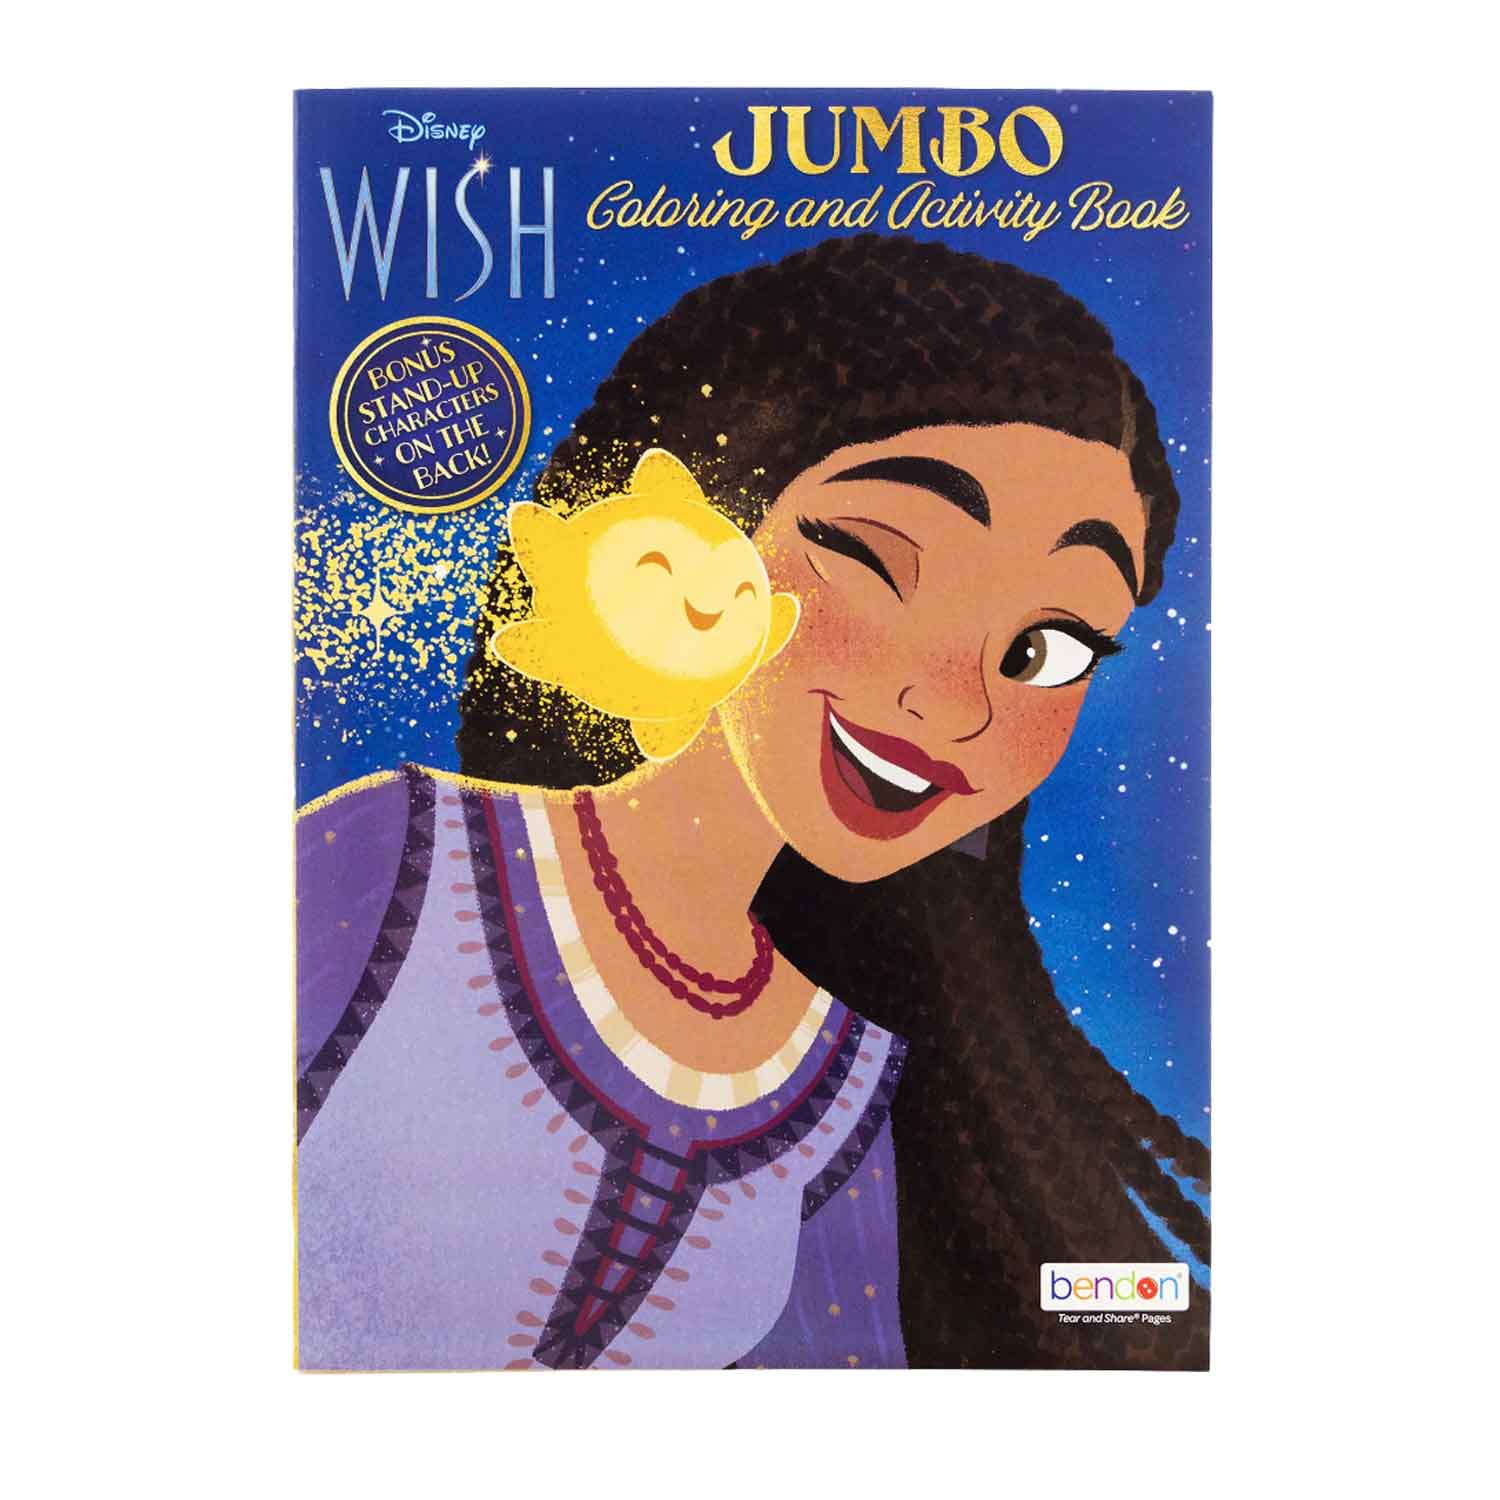 Disney WISH Coloring Book 1 Title, for Learning Activity Drawing, 80 Pages